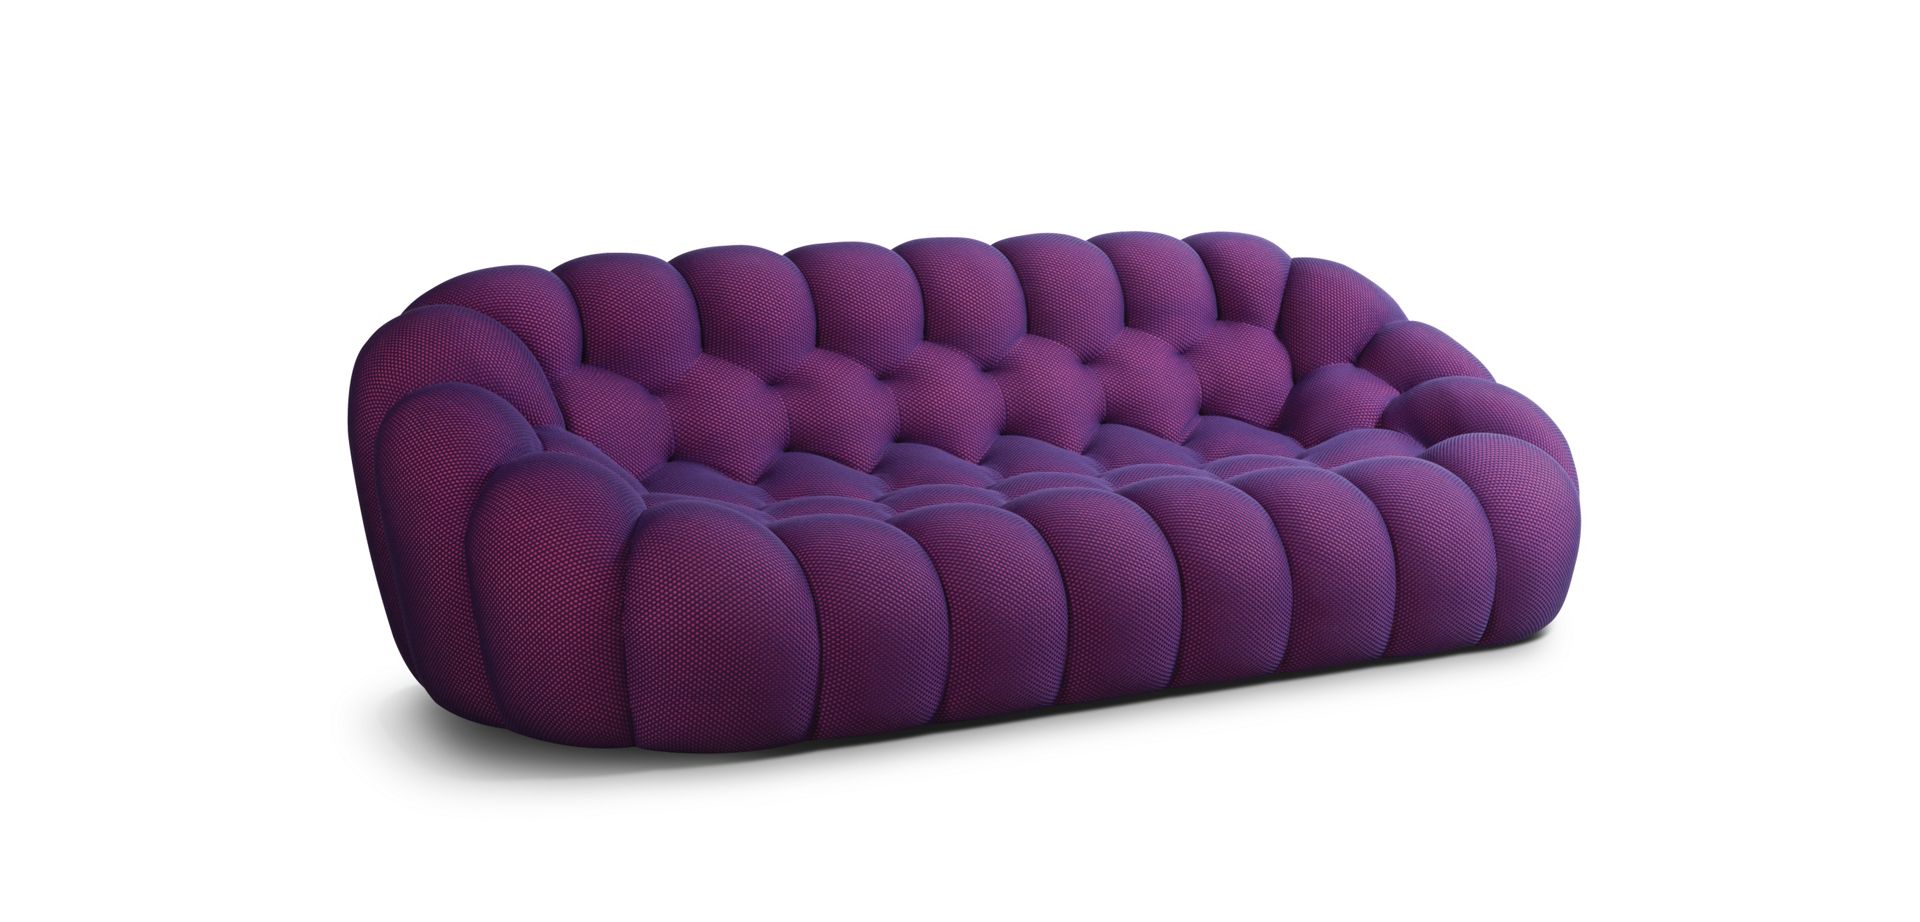 large 3-seat sofa - techno 3D image number 3